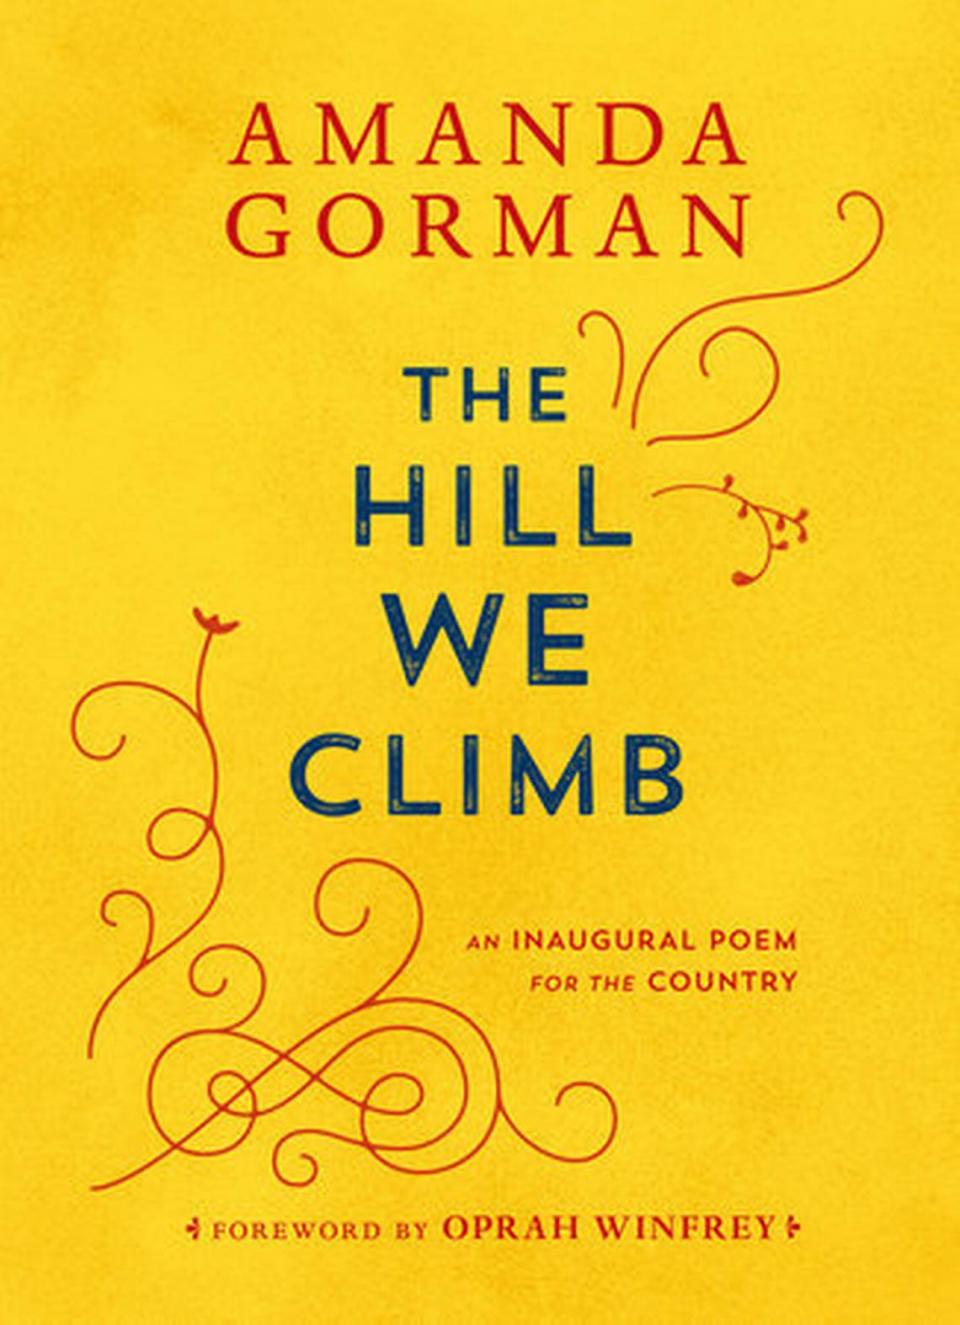 Amanda Gorman’s book containing the inaugural poem “The Hill We Climb” and a foreword by Oprah Winfrey. Miami-Dade, Florida, school officials put the book on a restricted list after a parent complained about it, citing “indirect hate messages.”